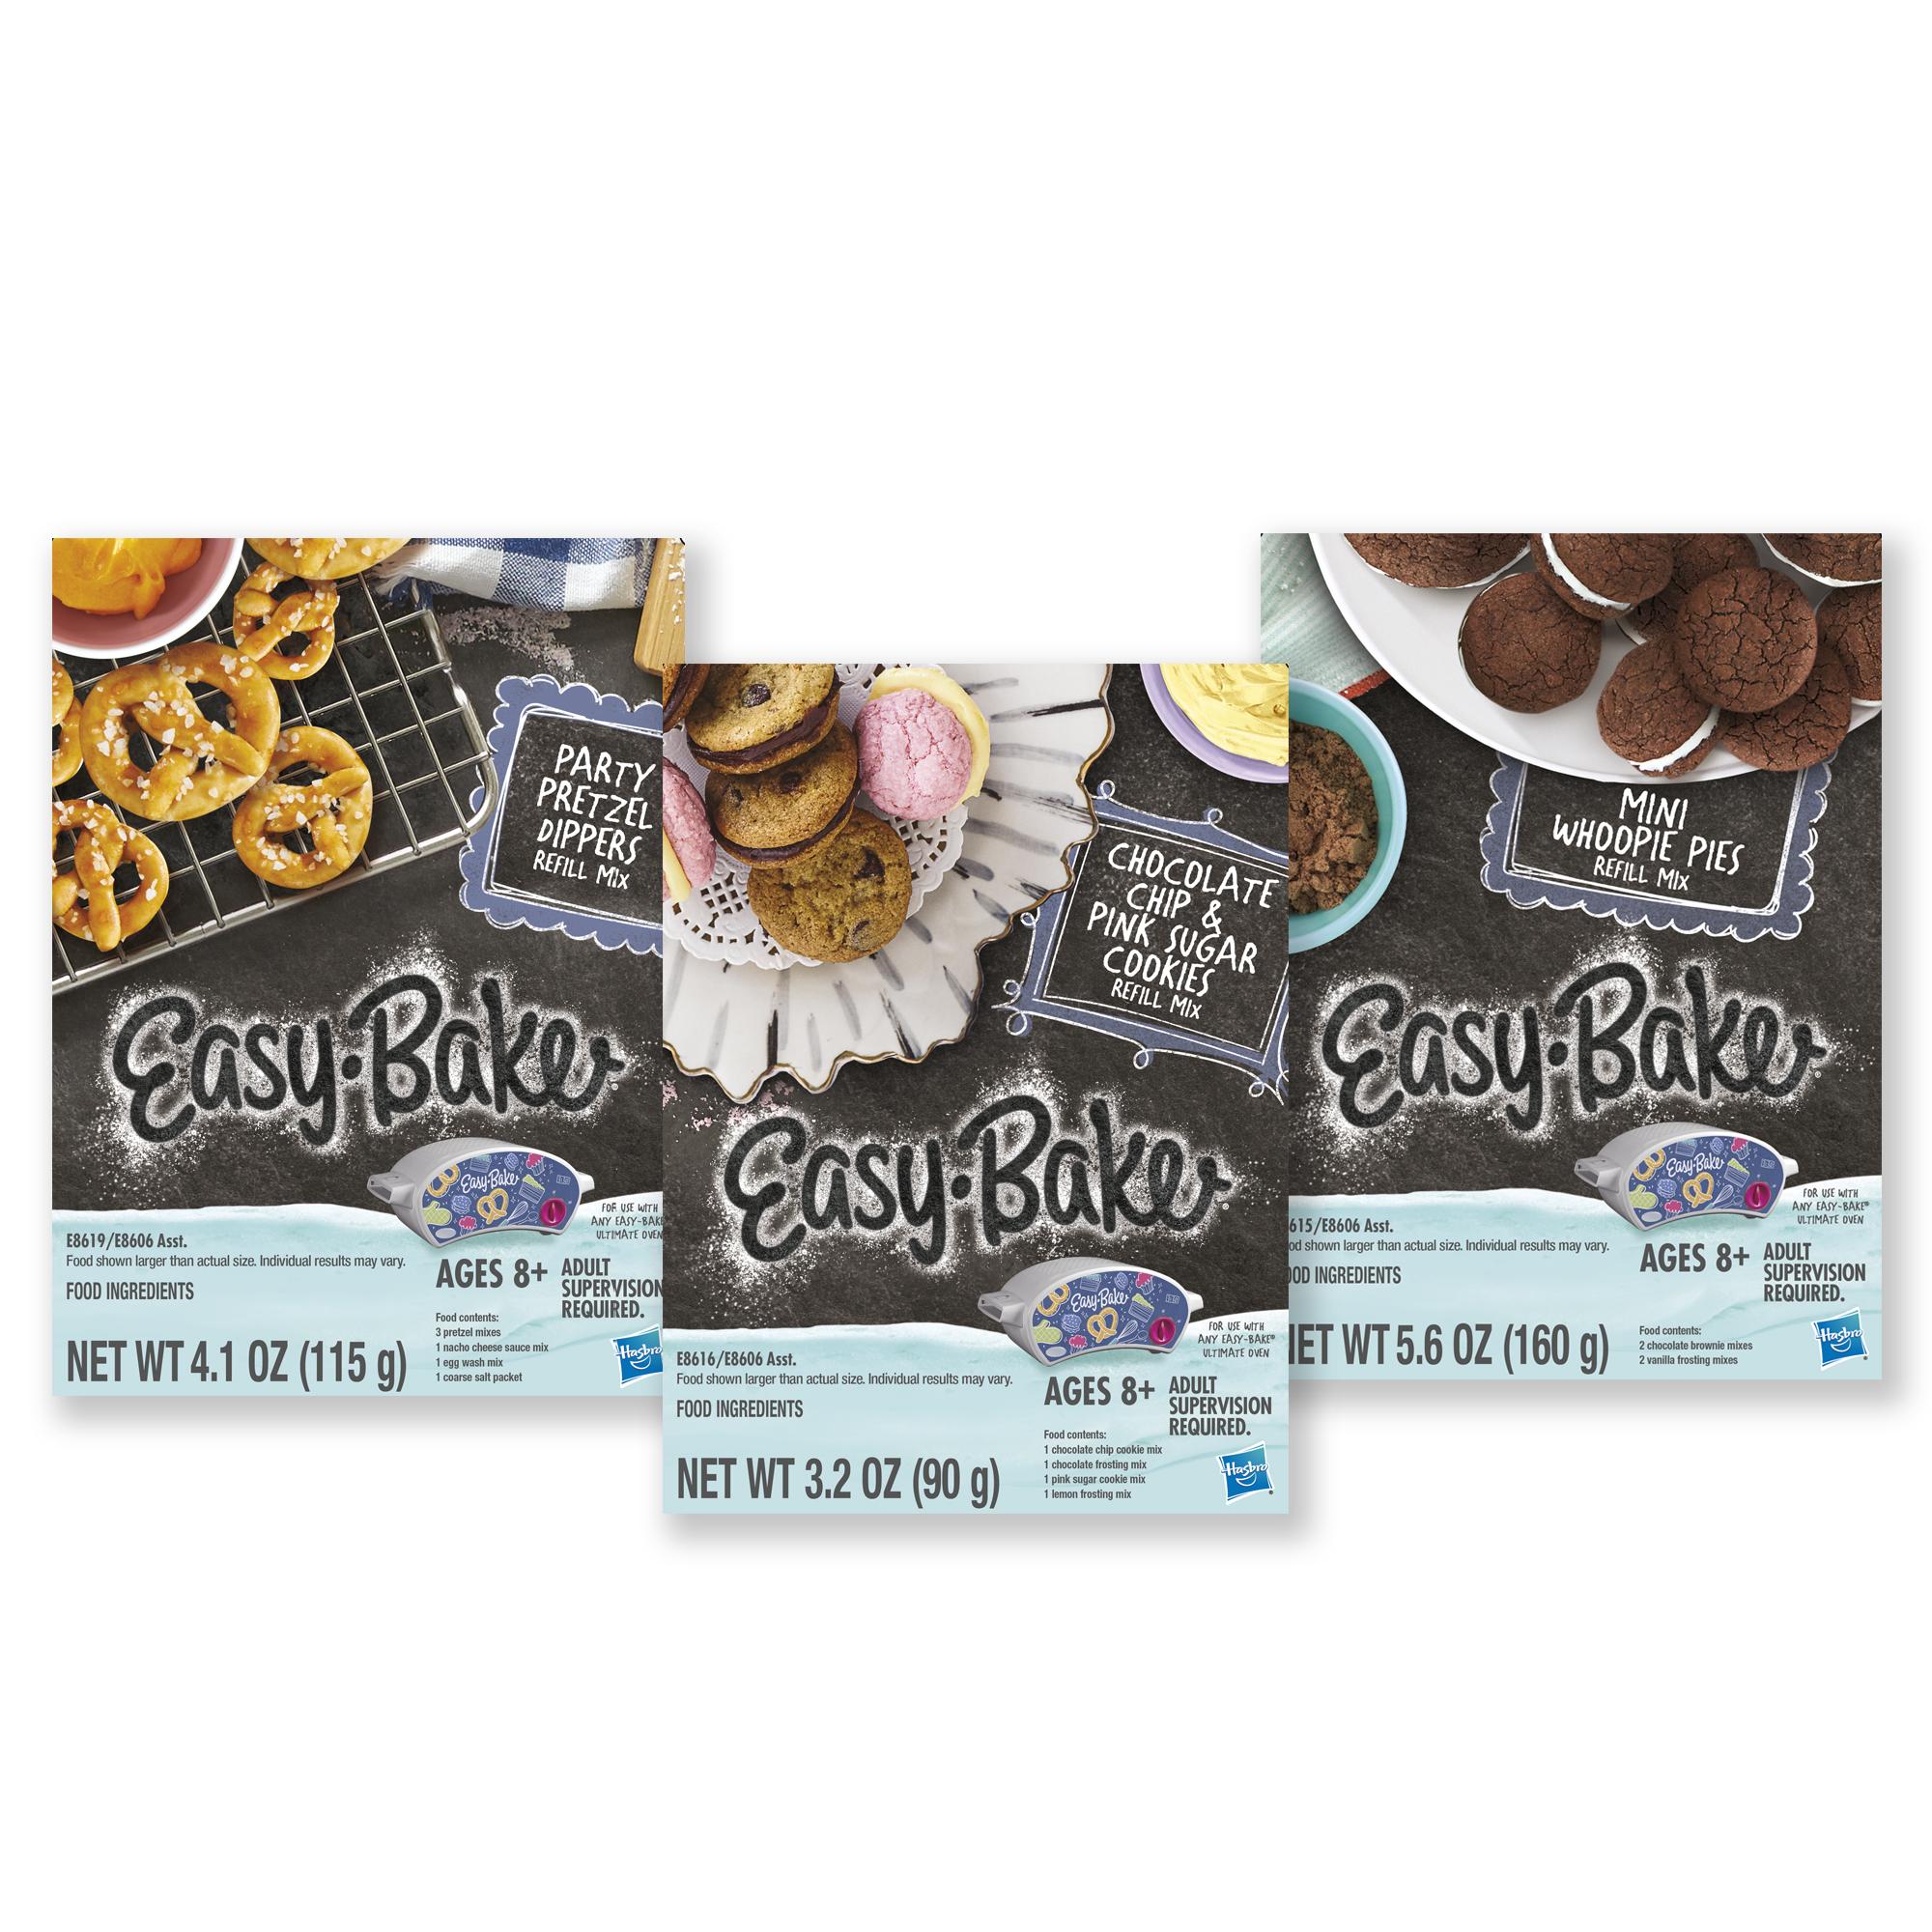 Easy-Bake Ultimate Oven Toy Refill Mix 3-Pack: Pretzels, Whoopie Pies, Chocolate Chip & Sugar Cookie Mixes, Ages 8 & Up